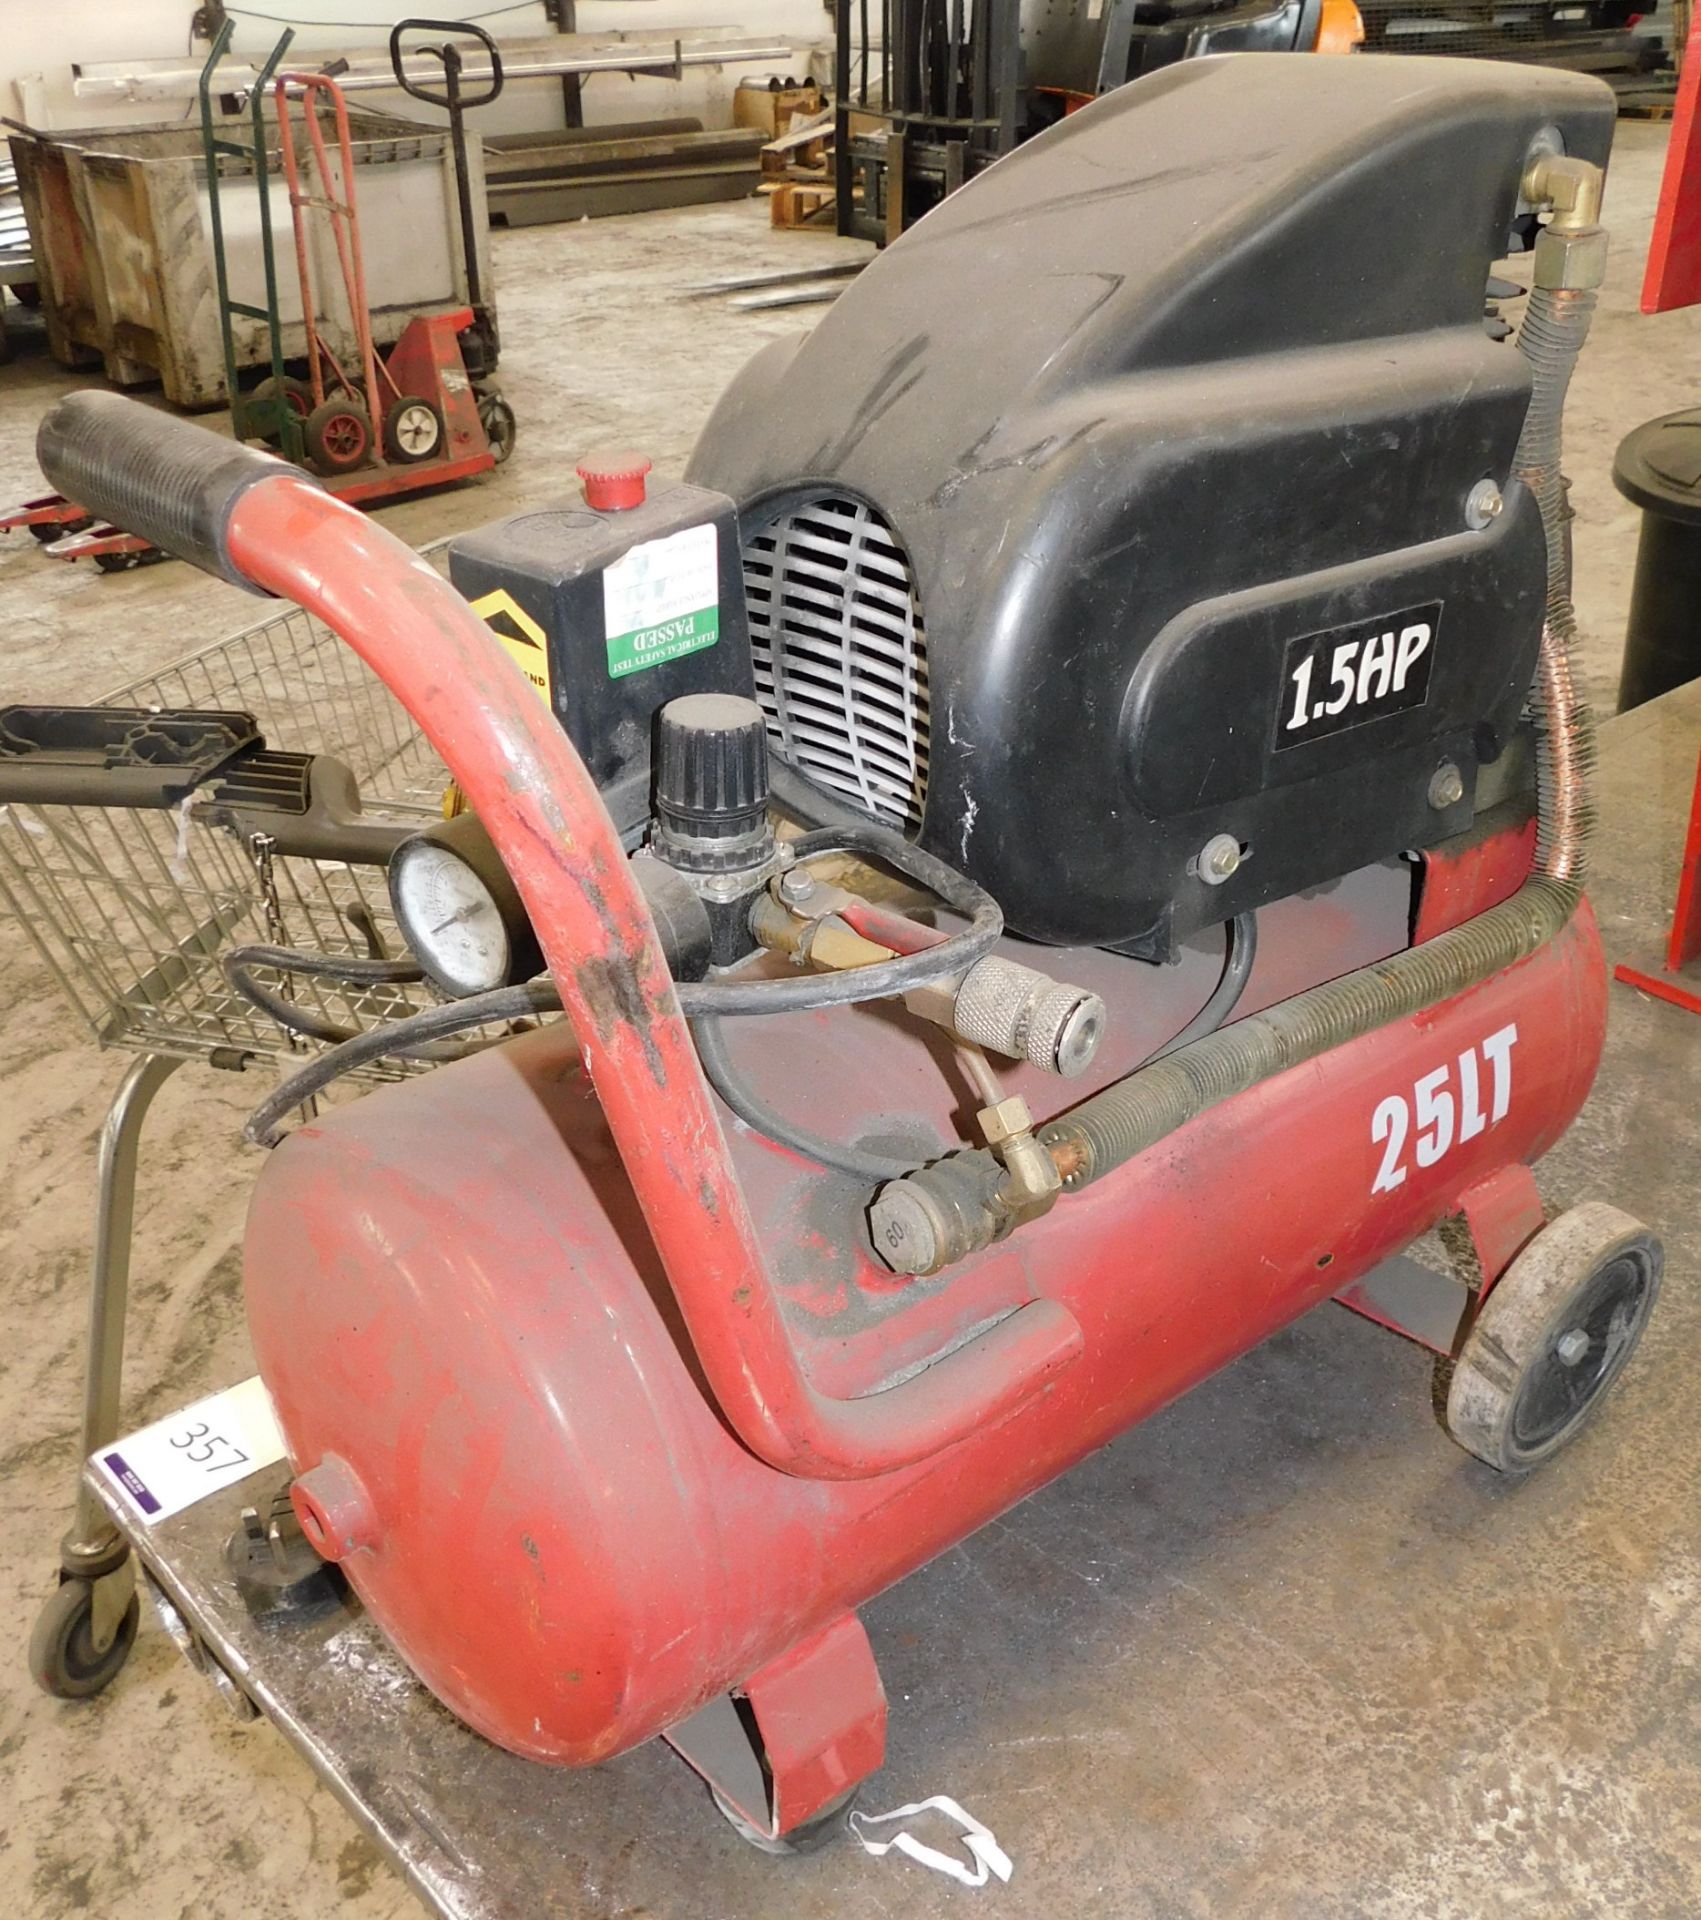 Sealey Portable Compressor, 240v (Location: Sheffield. Please Refer to General Notes) - Image 2 of 2